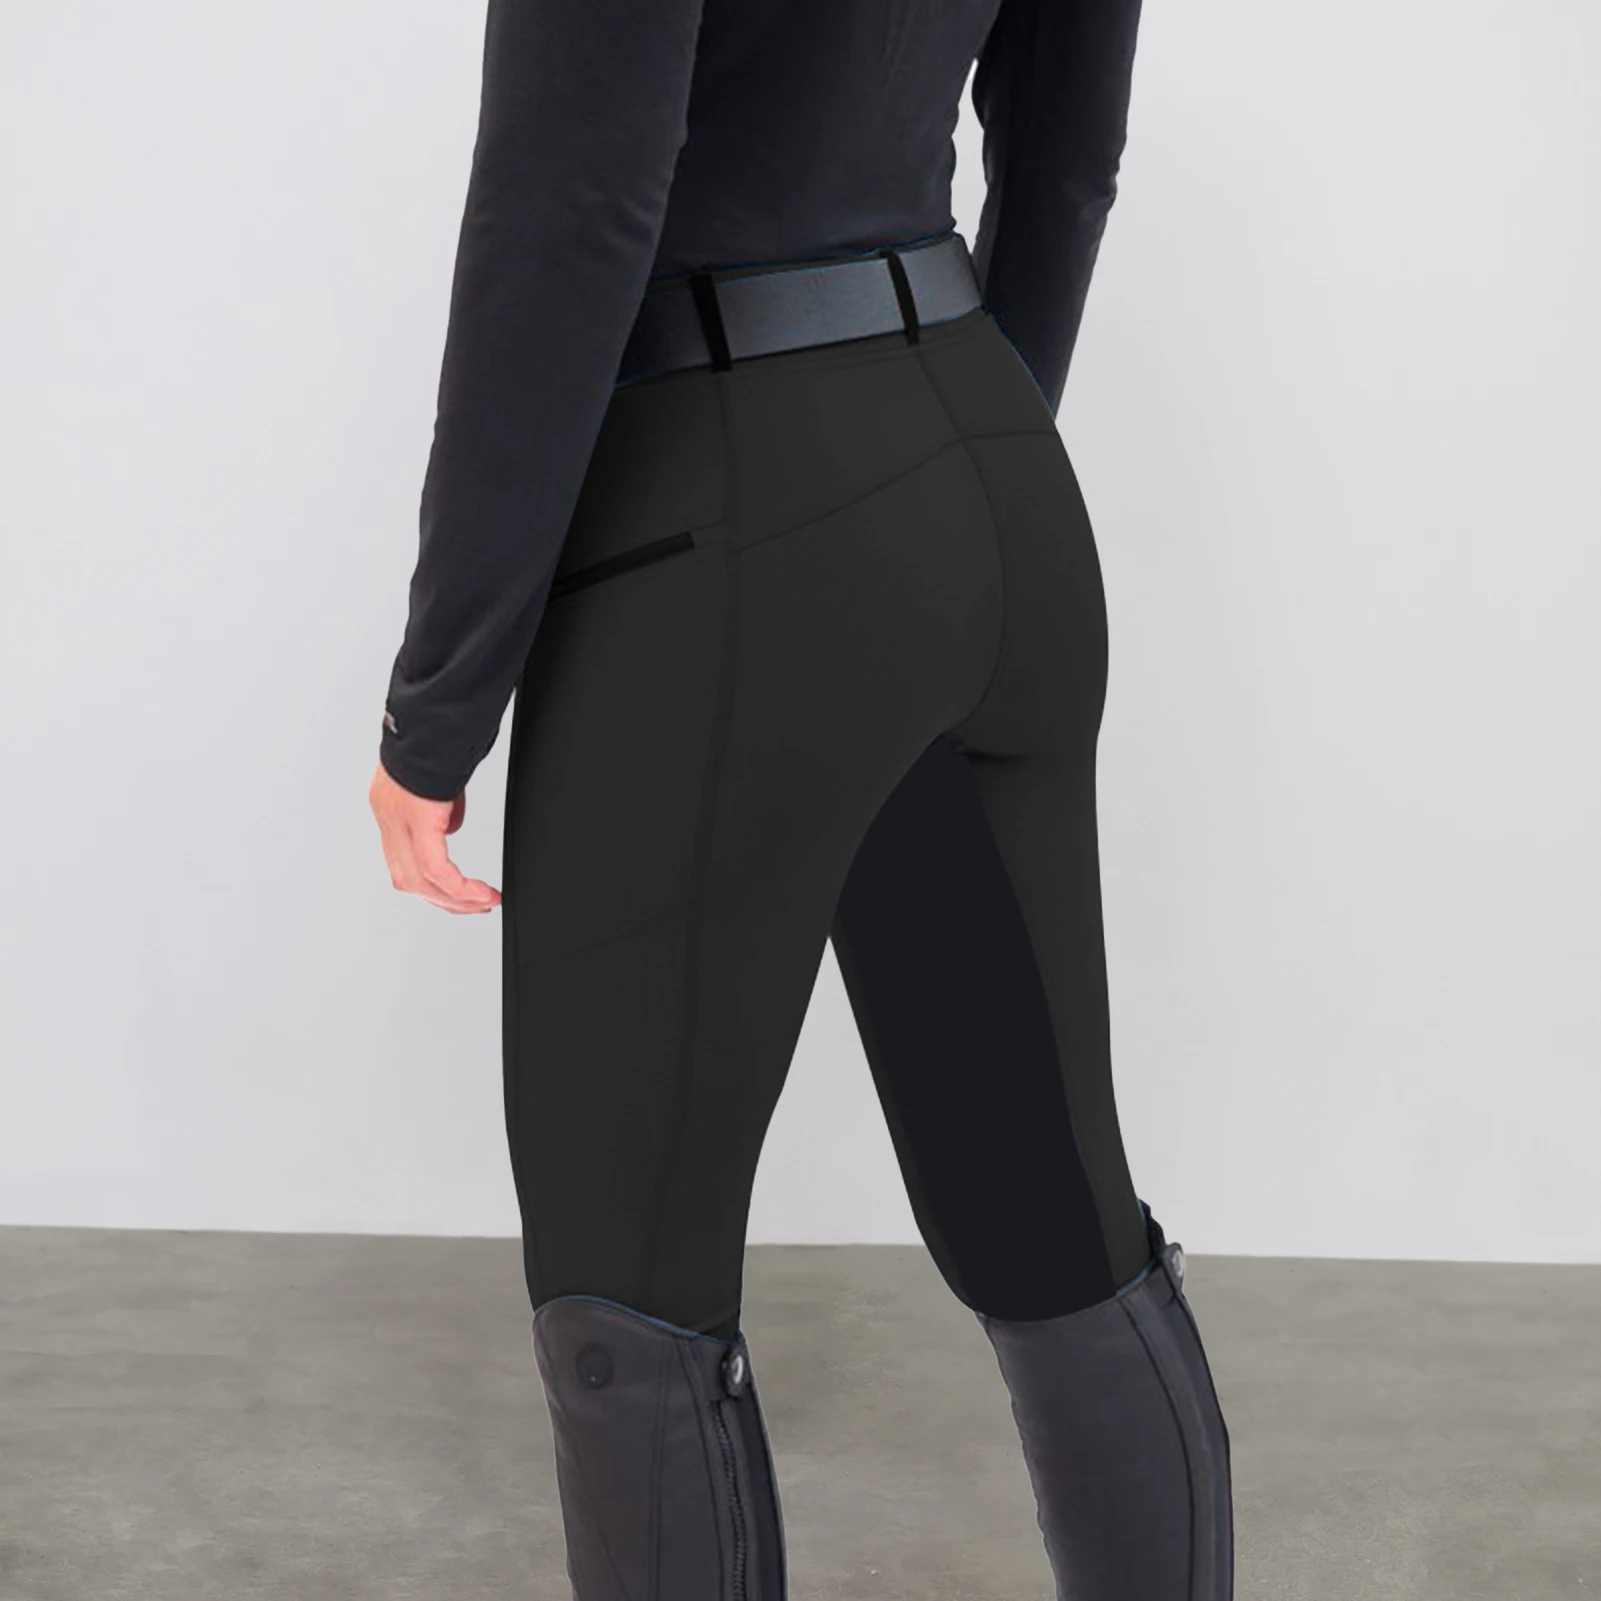 Size Small Details about   Irideon Gray Riding Breeches Knee Patches Riding Pants Tights 